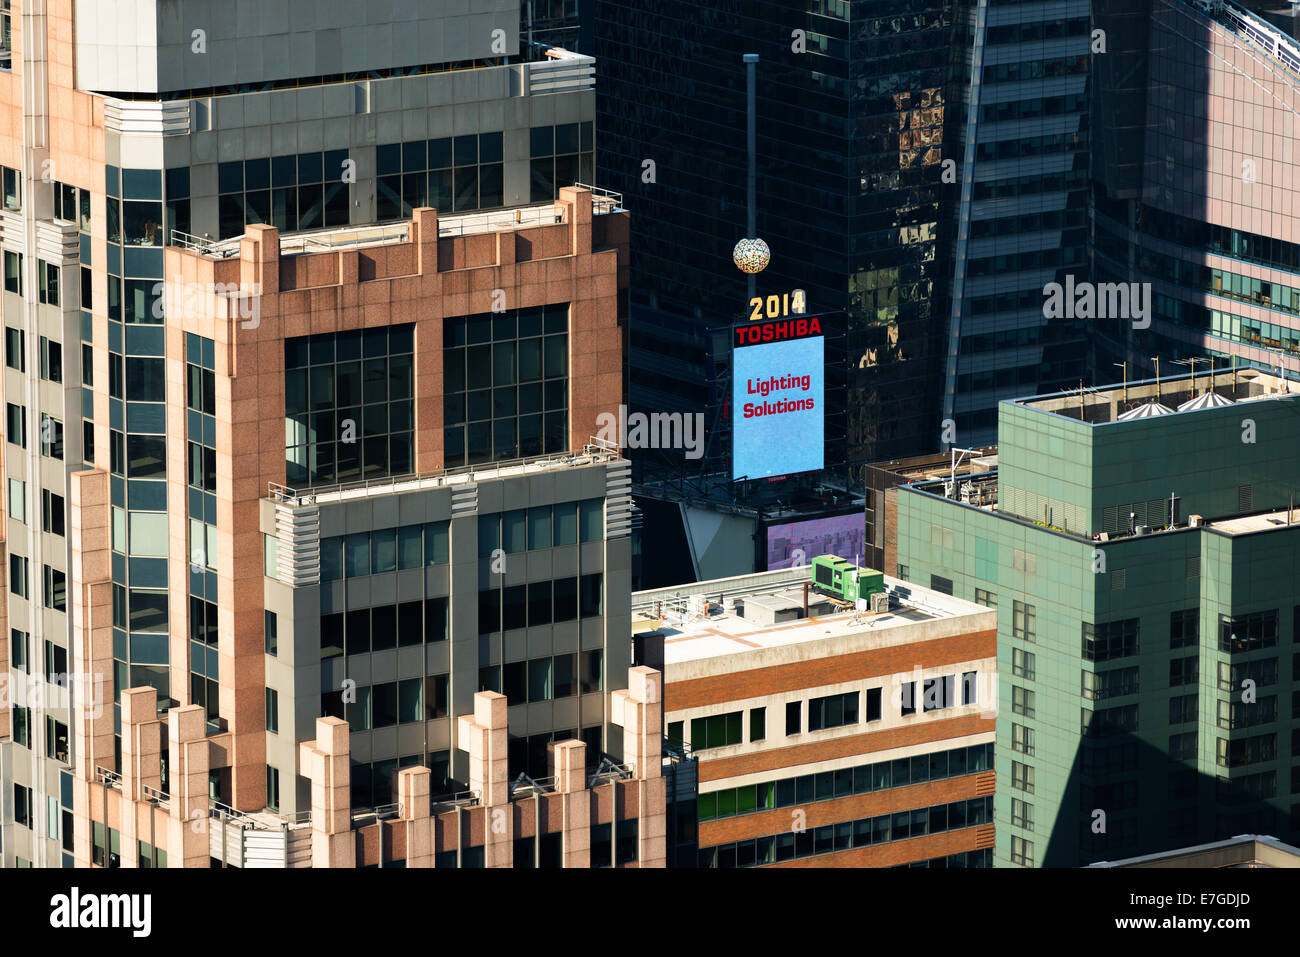 30 AUGUST 2014 - NEW YORK: Advertisement of the  'Toshiba' brand on Times Square reads 'Lighting Solutions'. Stock Photo